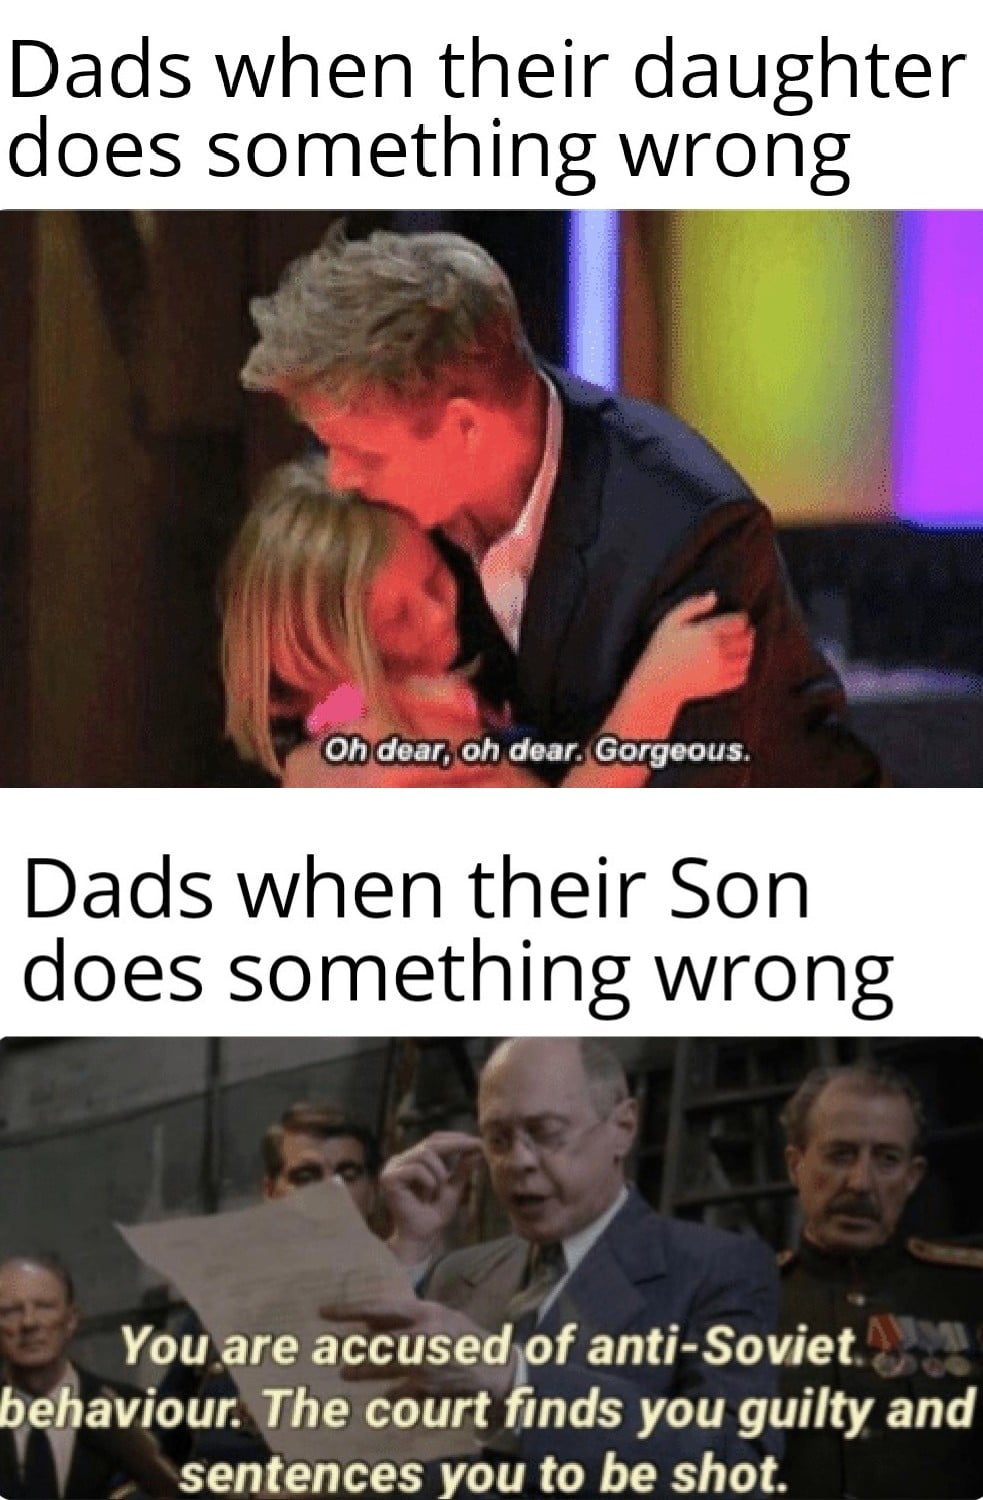 Dank Meme dank-memes cute text: Dads when their daughter does something wrong Oh dear, oh dear. Gorgeous Dads when their Son does something wrong You are accused pf anti-Soviet. u behaviour. The court finds you guilty and sentences you to be shot. 